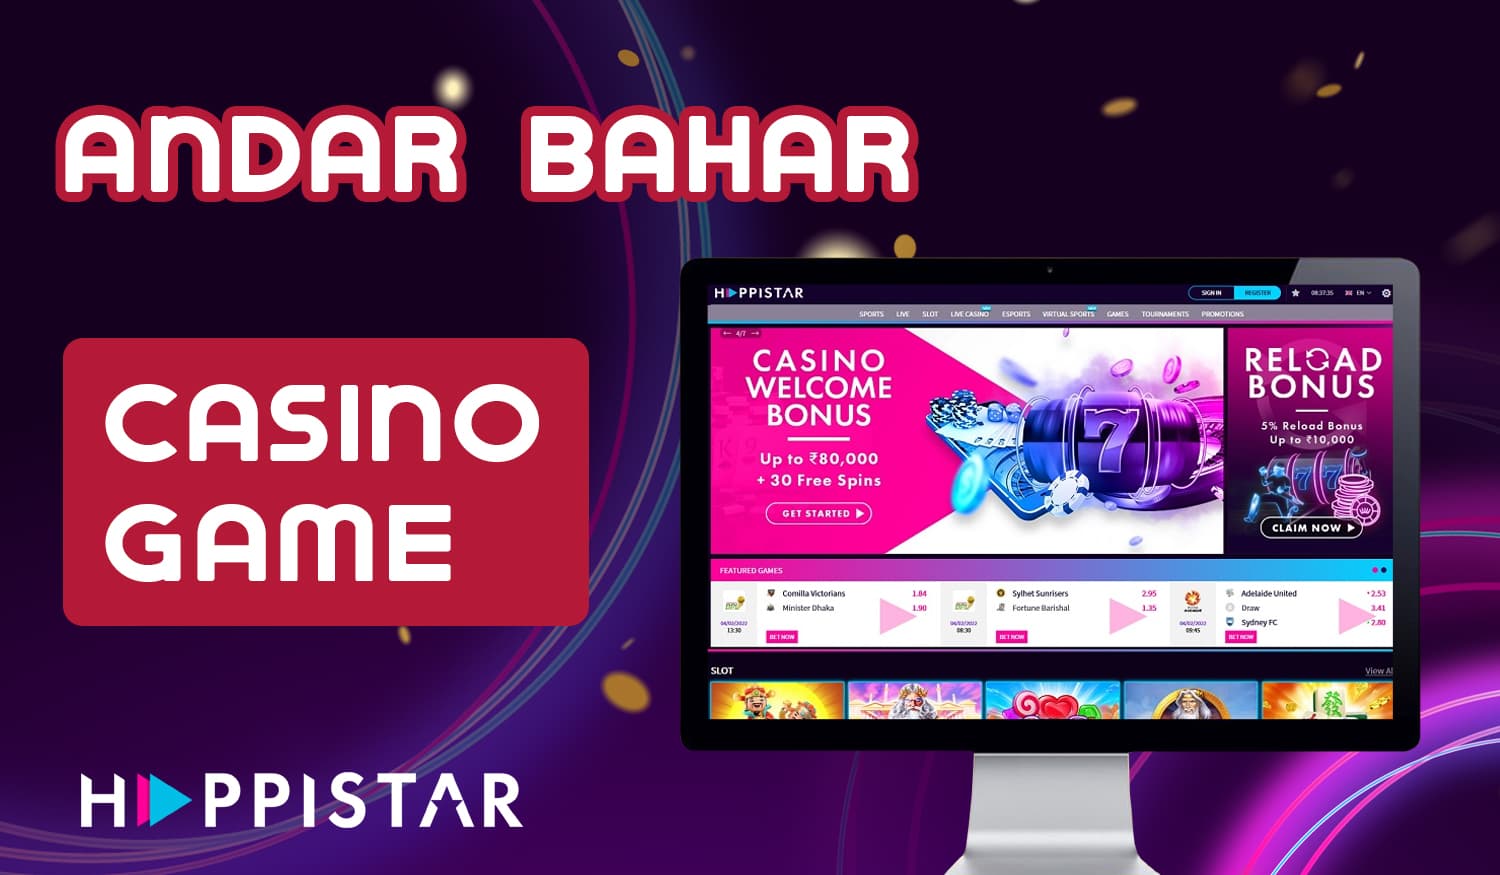 Games in the online casino section that Happistar offers to users from India